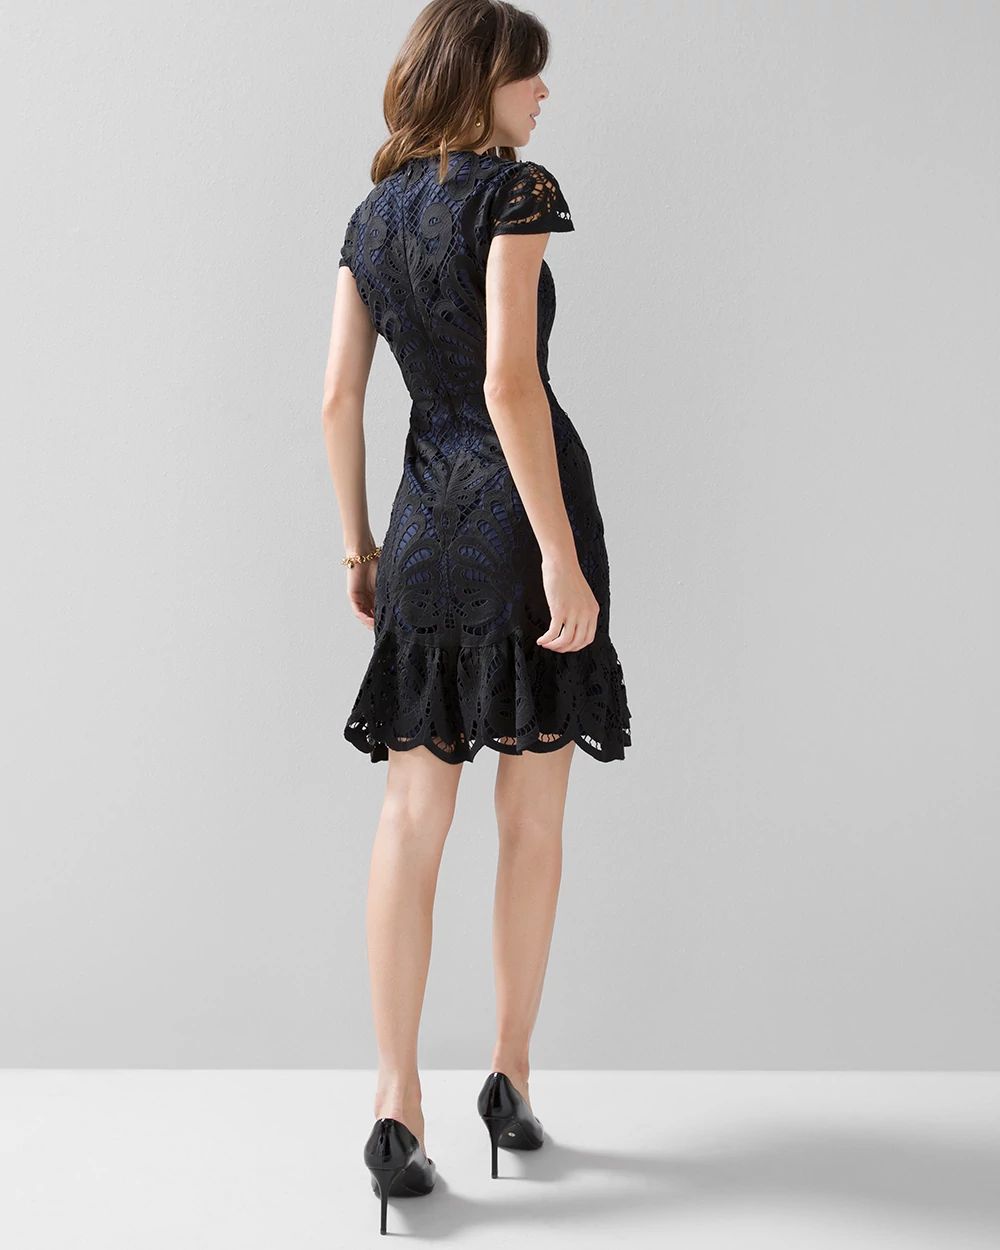 Cap Sleeve Lace Sheath Dress click to view larger image.